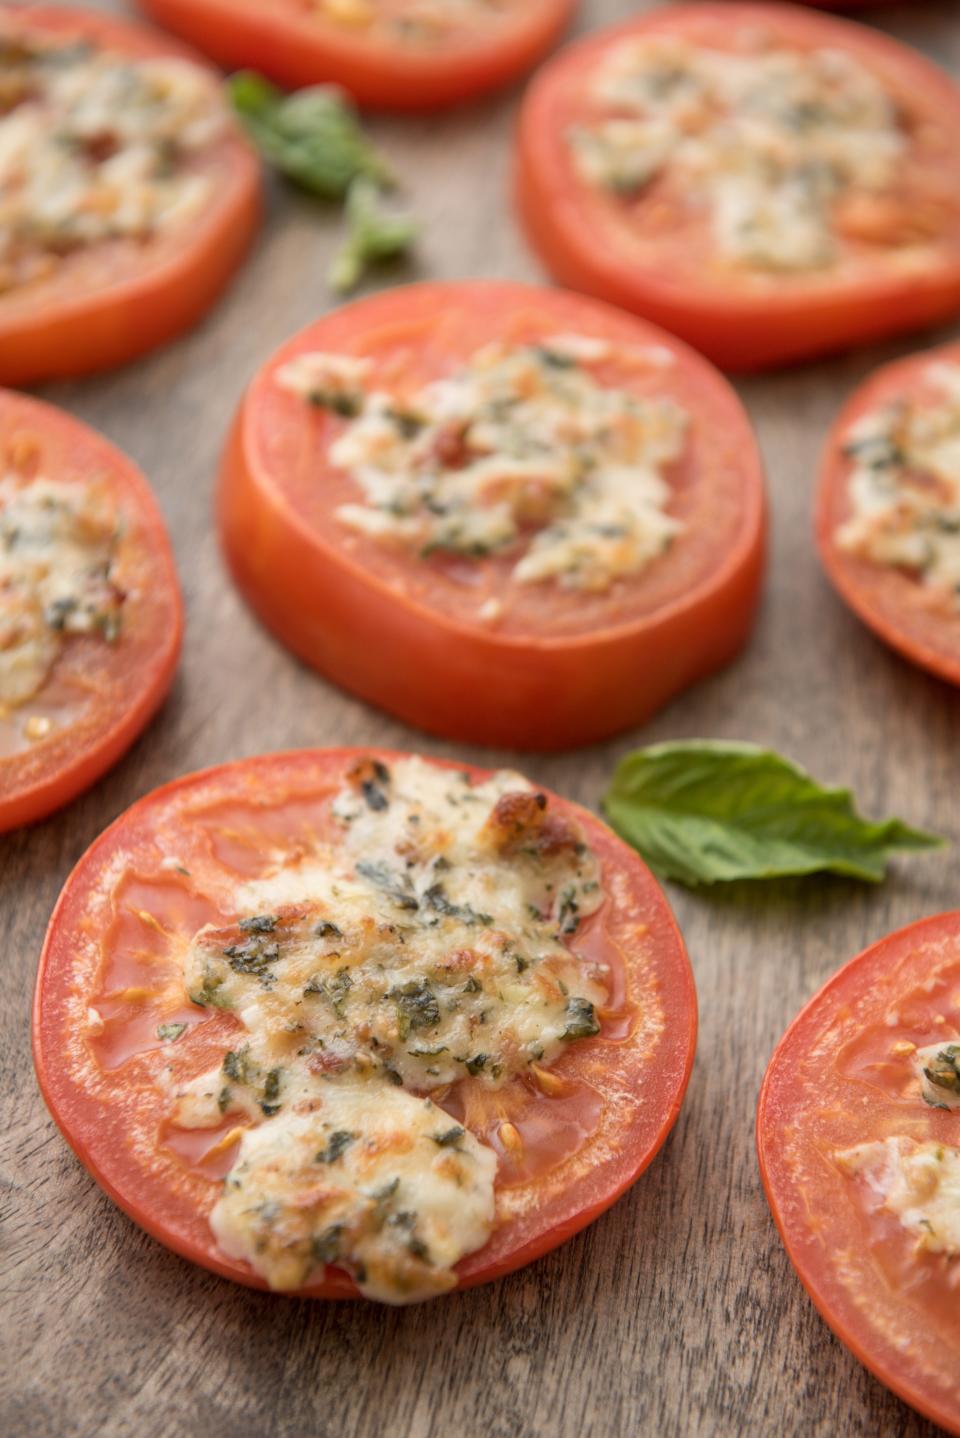 Broiled tomatoes with mozzarella and Parmesan.